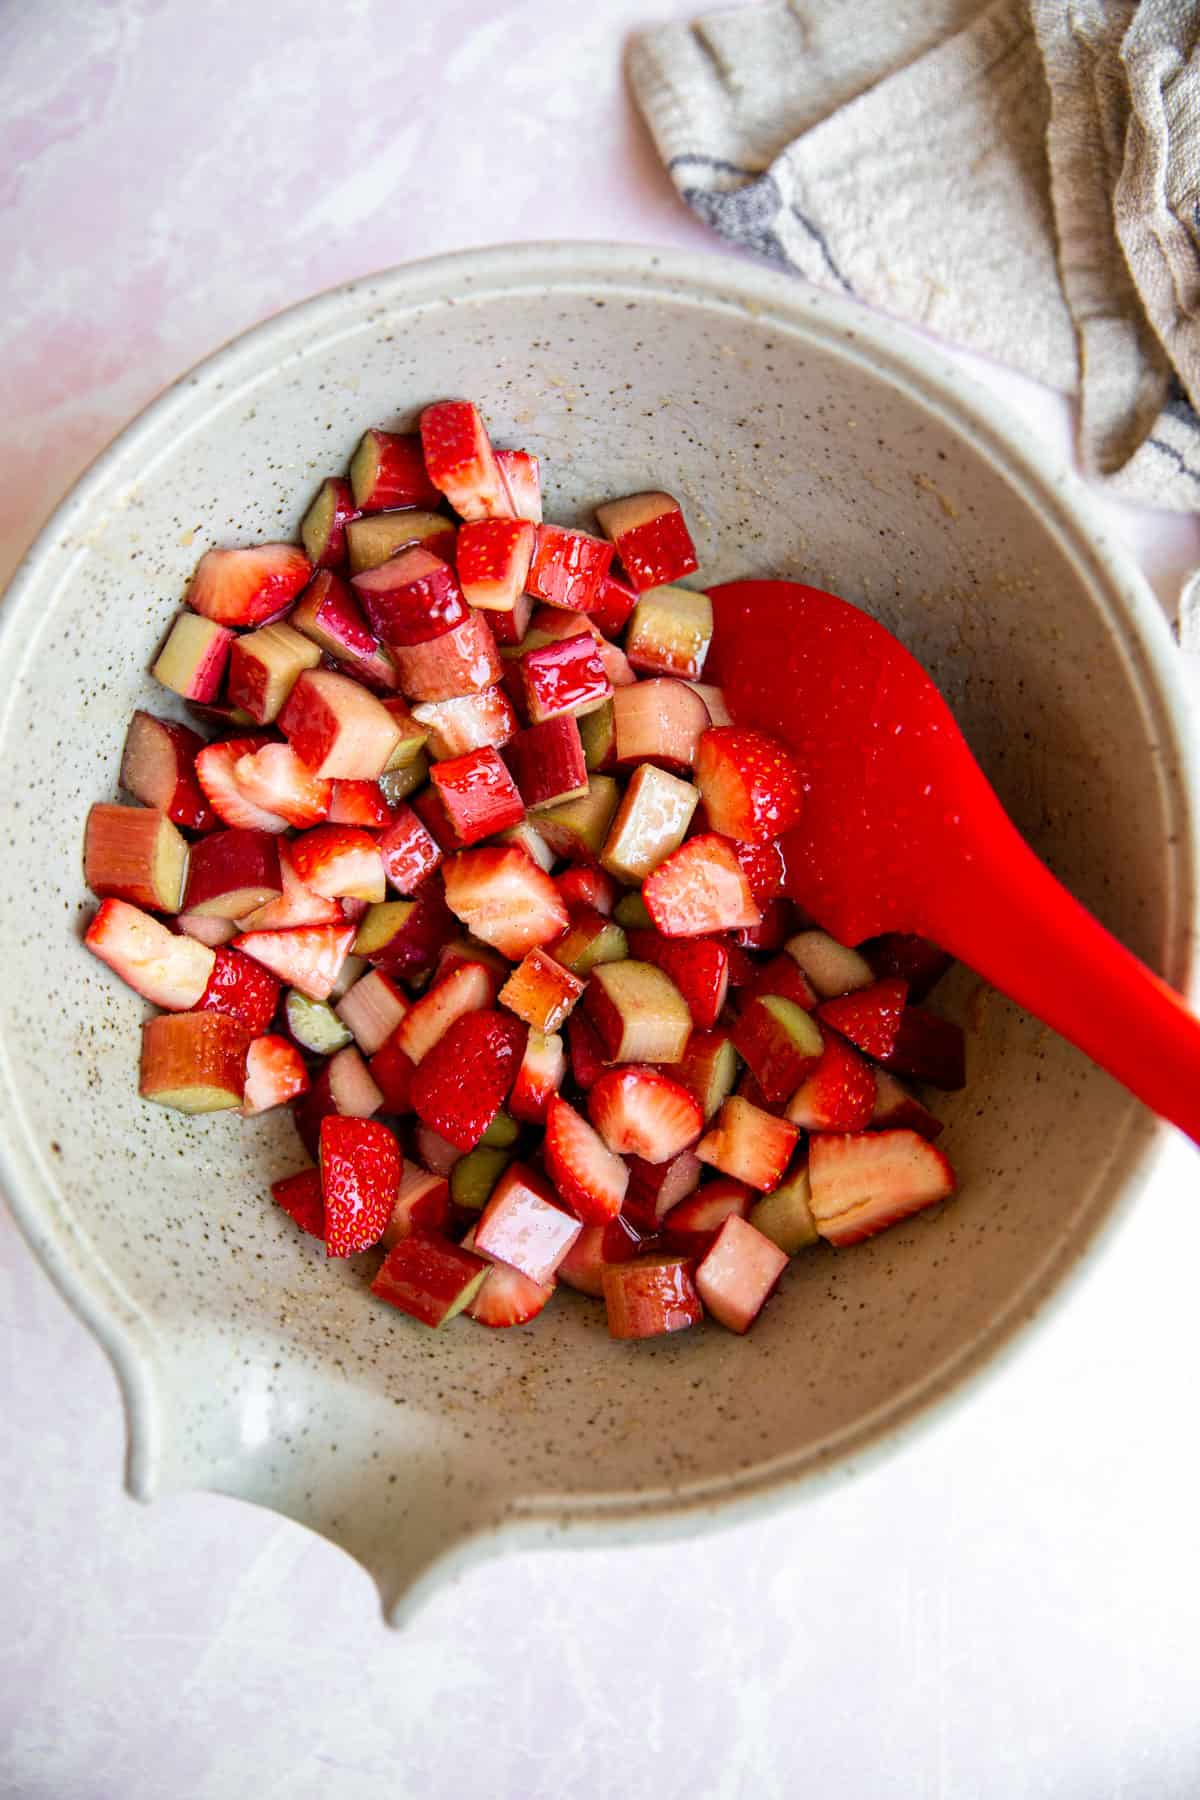 a bowl of diced strawberries and rhubarb pieces with a red spatula resting on the side